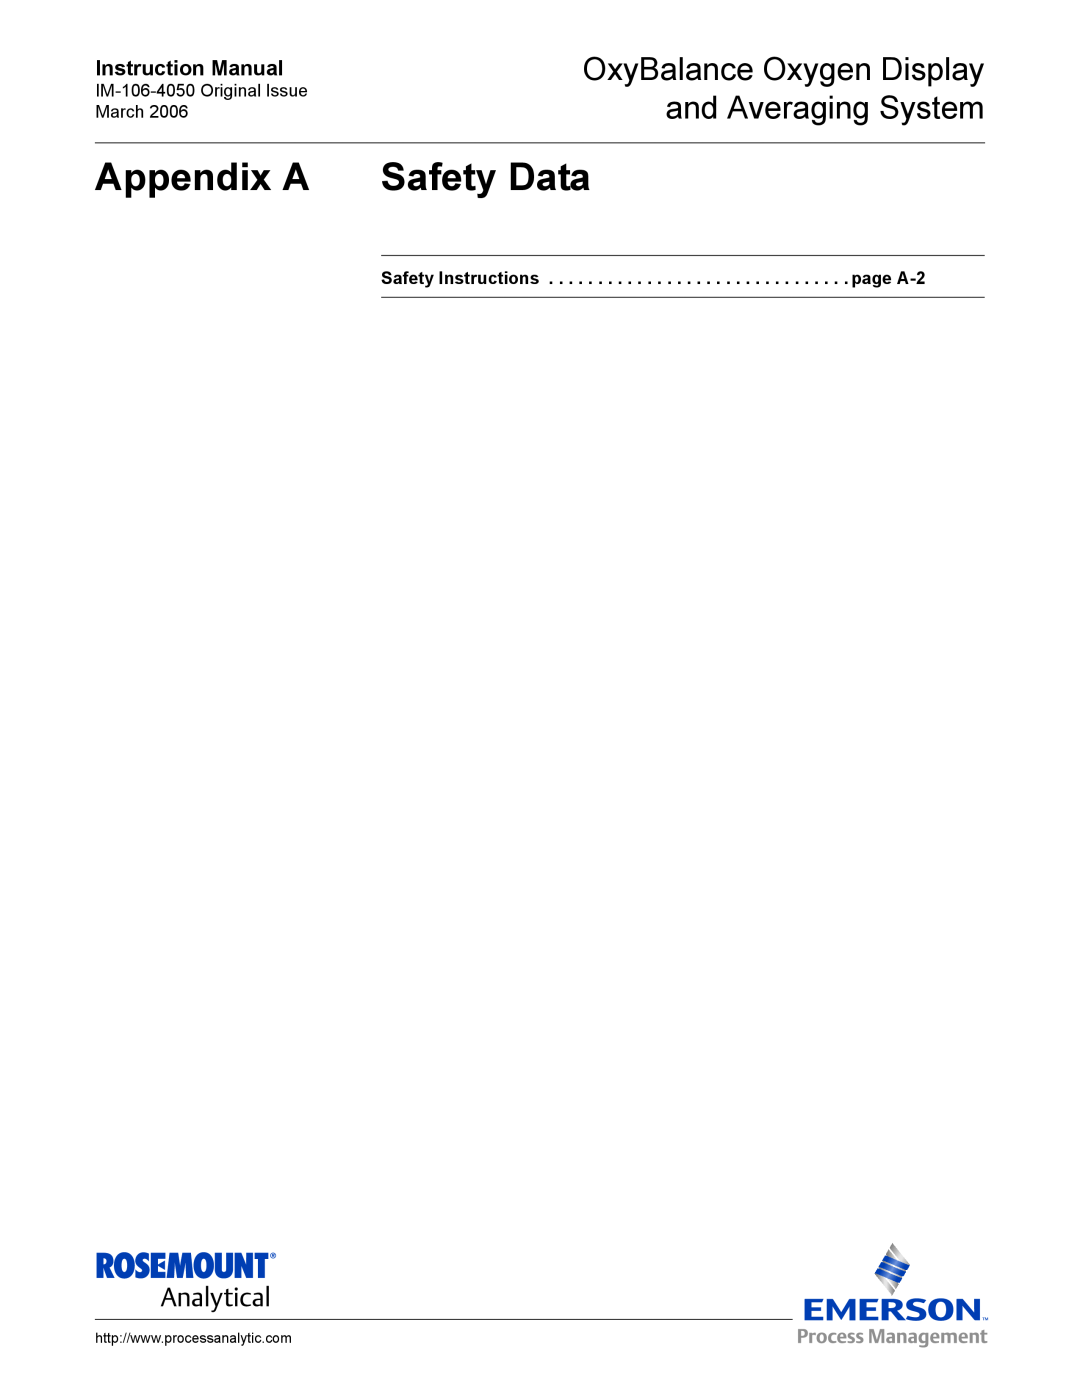 Emerson IM-106-4050 Appendix A, Safety Data, OxyBalance Oxygen Display and Averaging System, Instruction Manual 